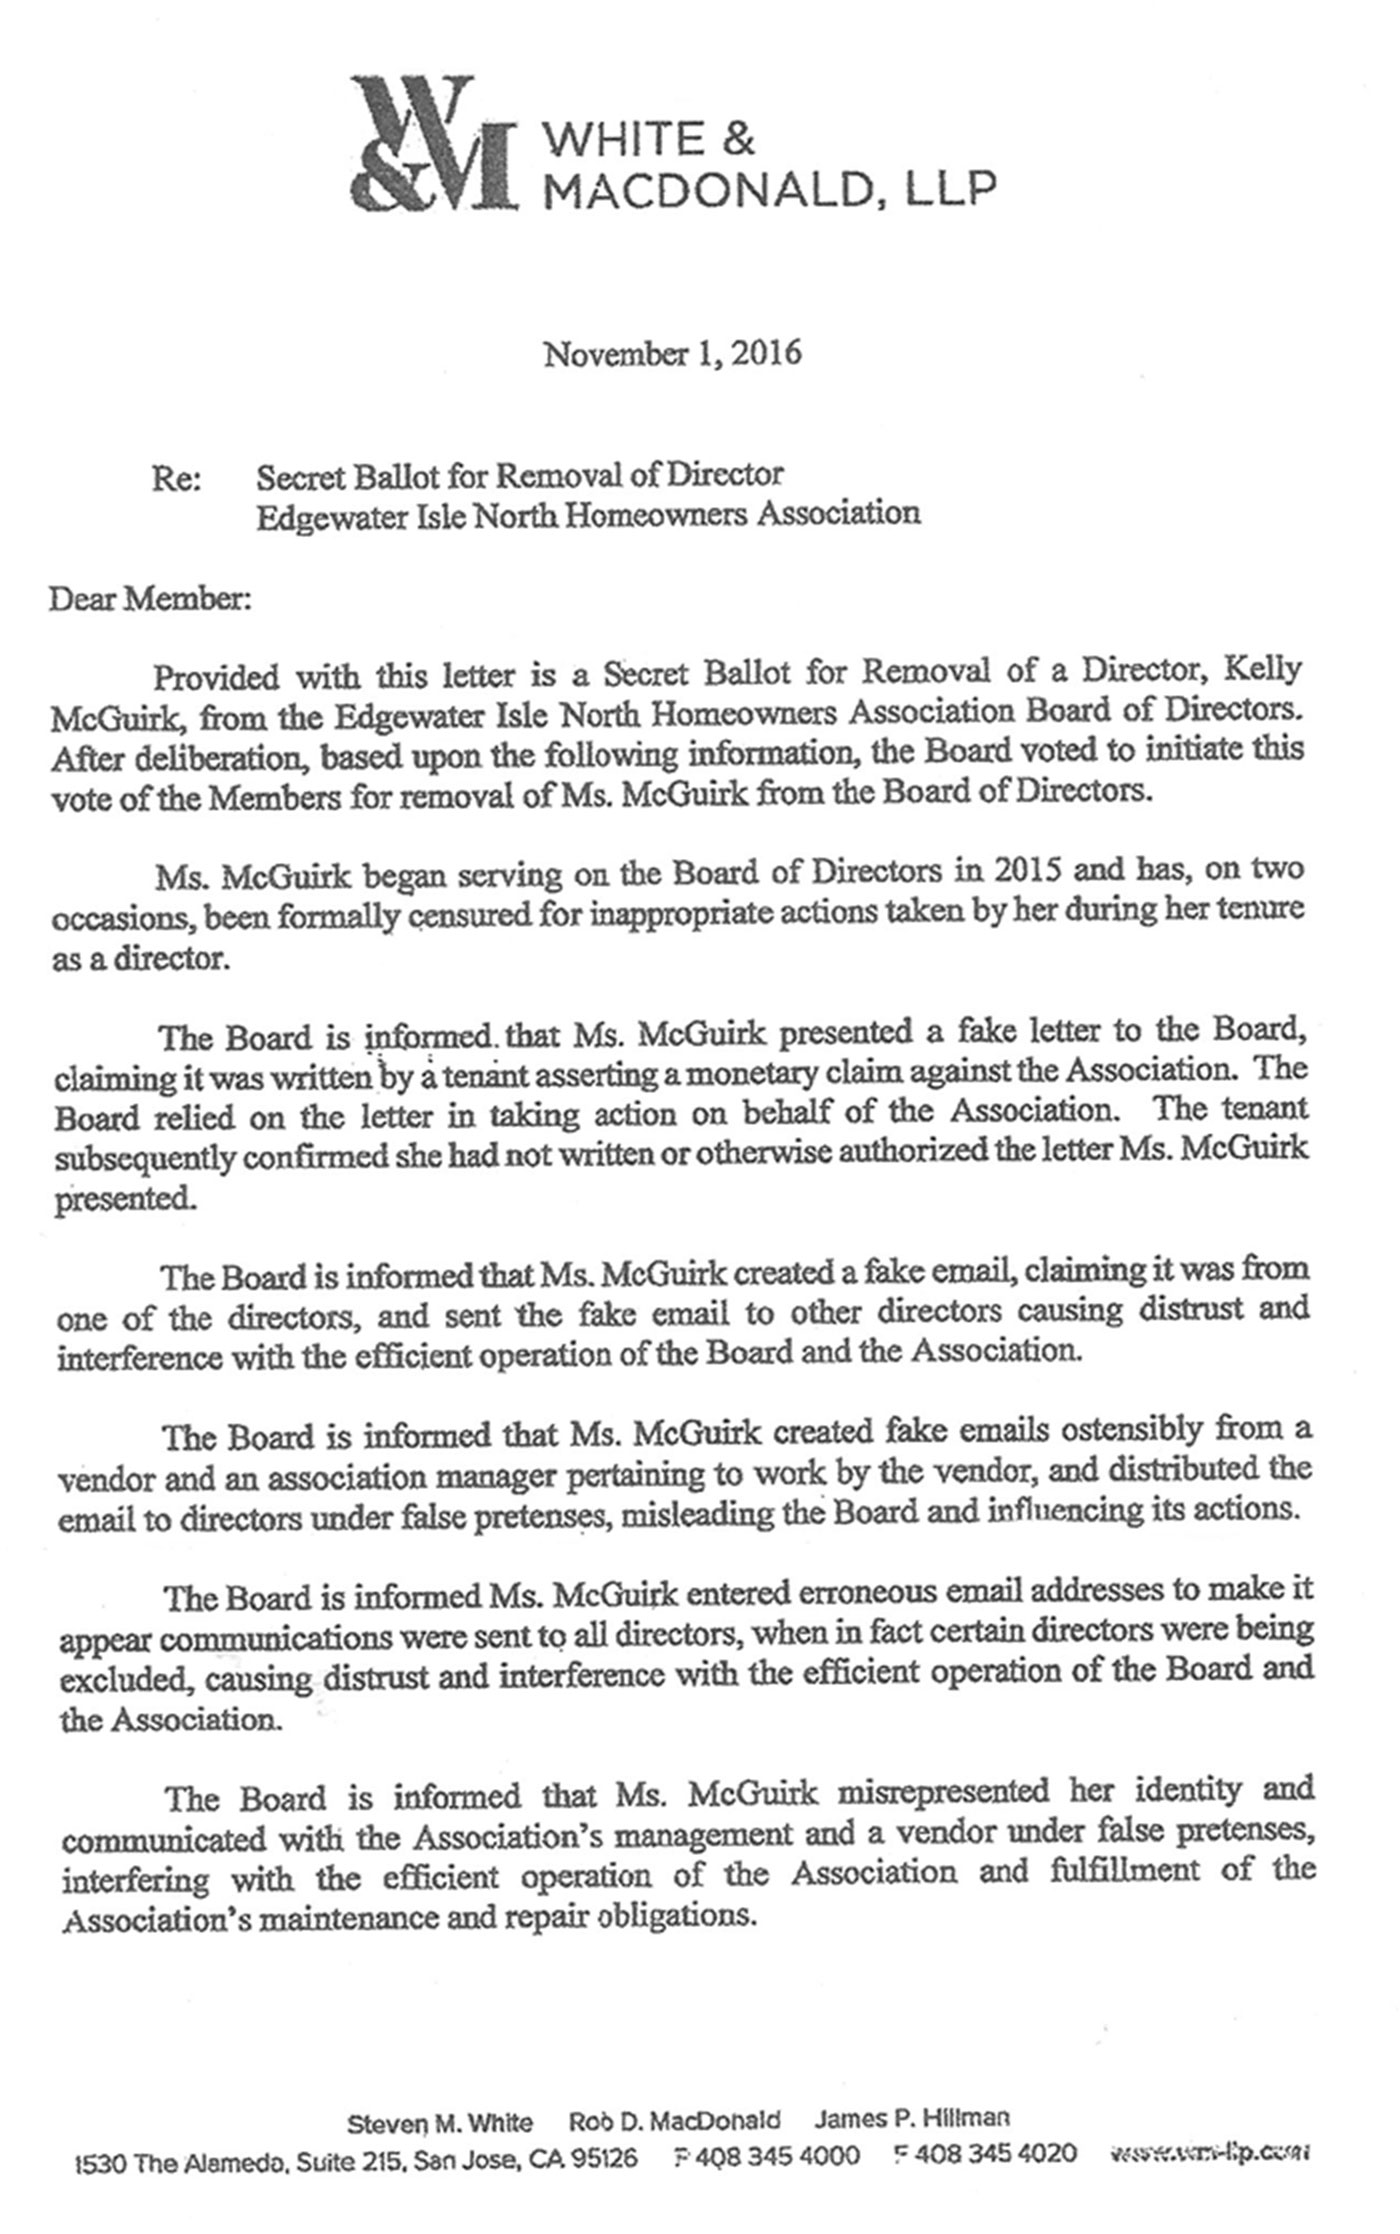 Letter for removal of Kelly McGuirk from board of directors after formal censure including presenting a fake letter to the board of directors.